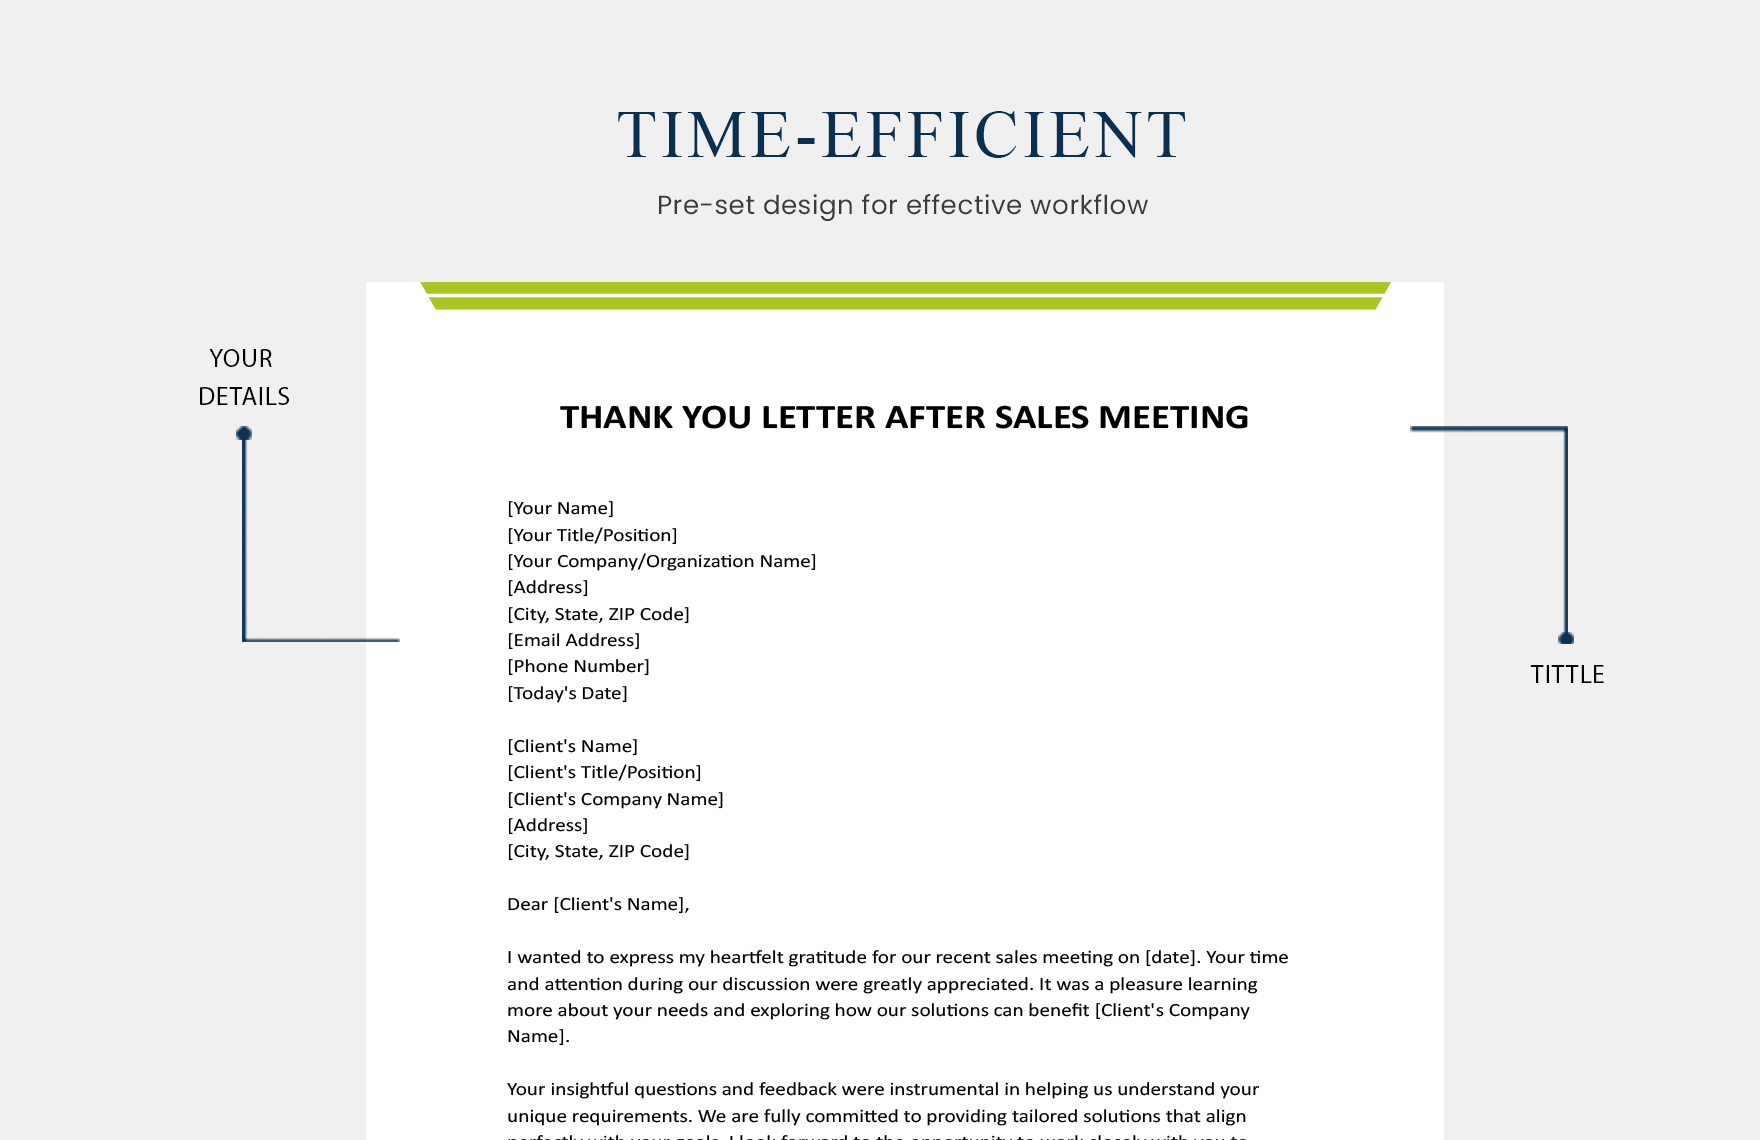 Thank You Letter After Sales Meeting